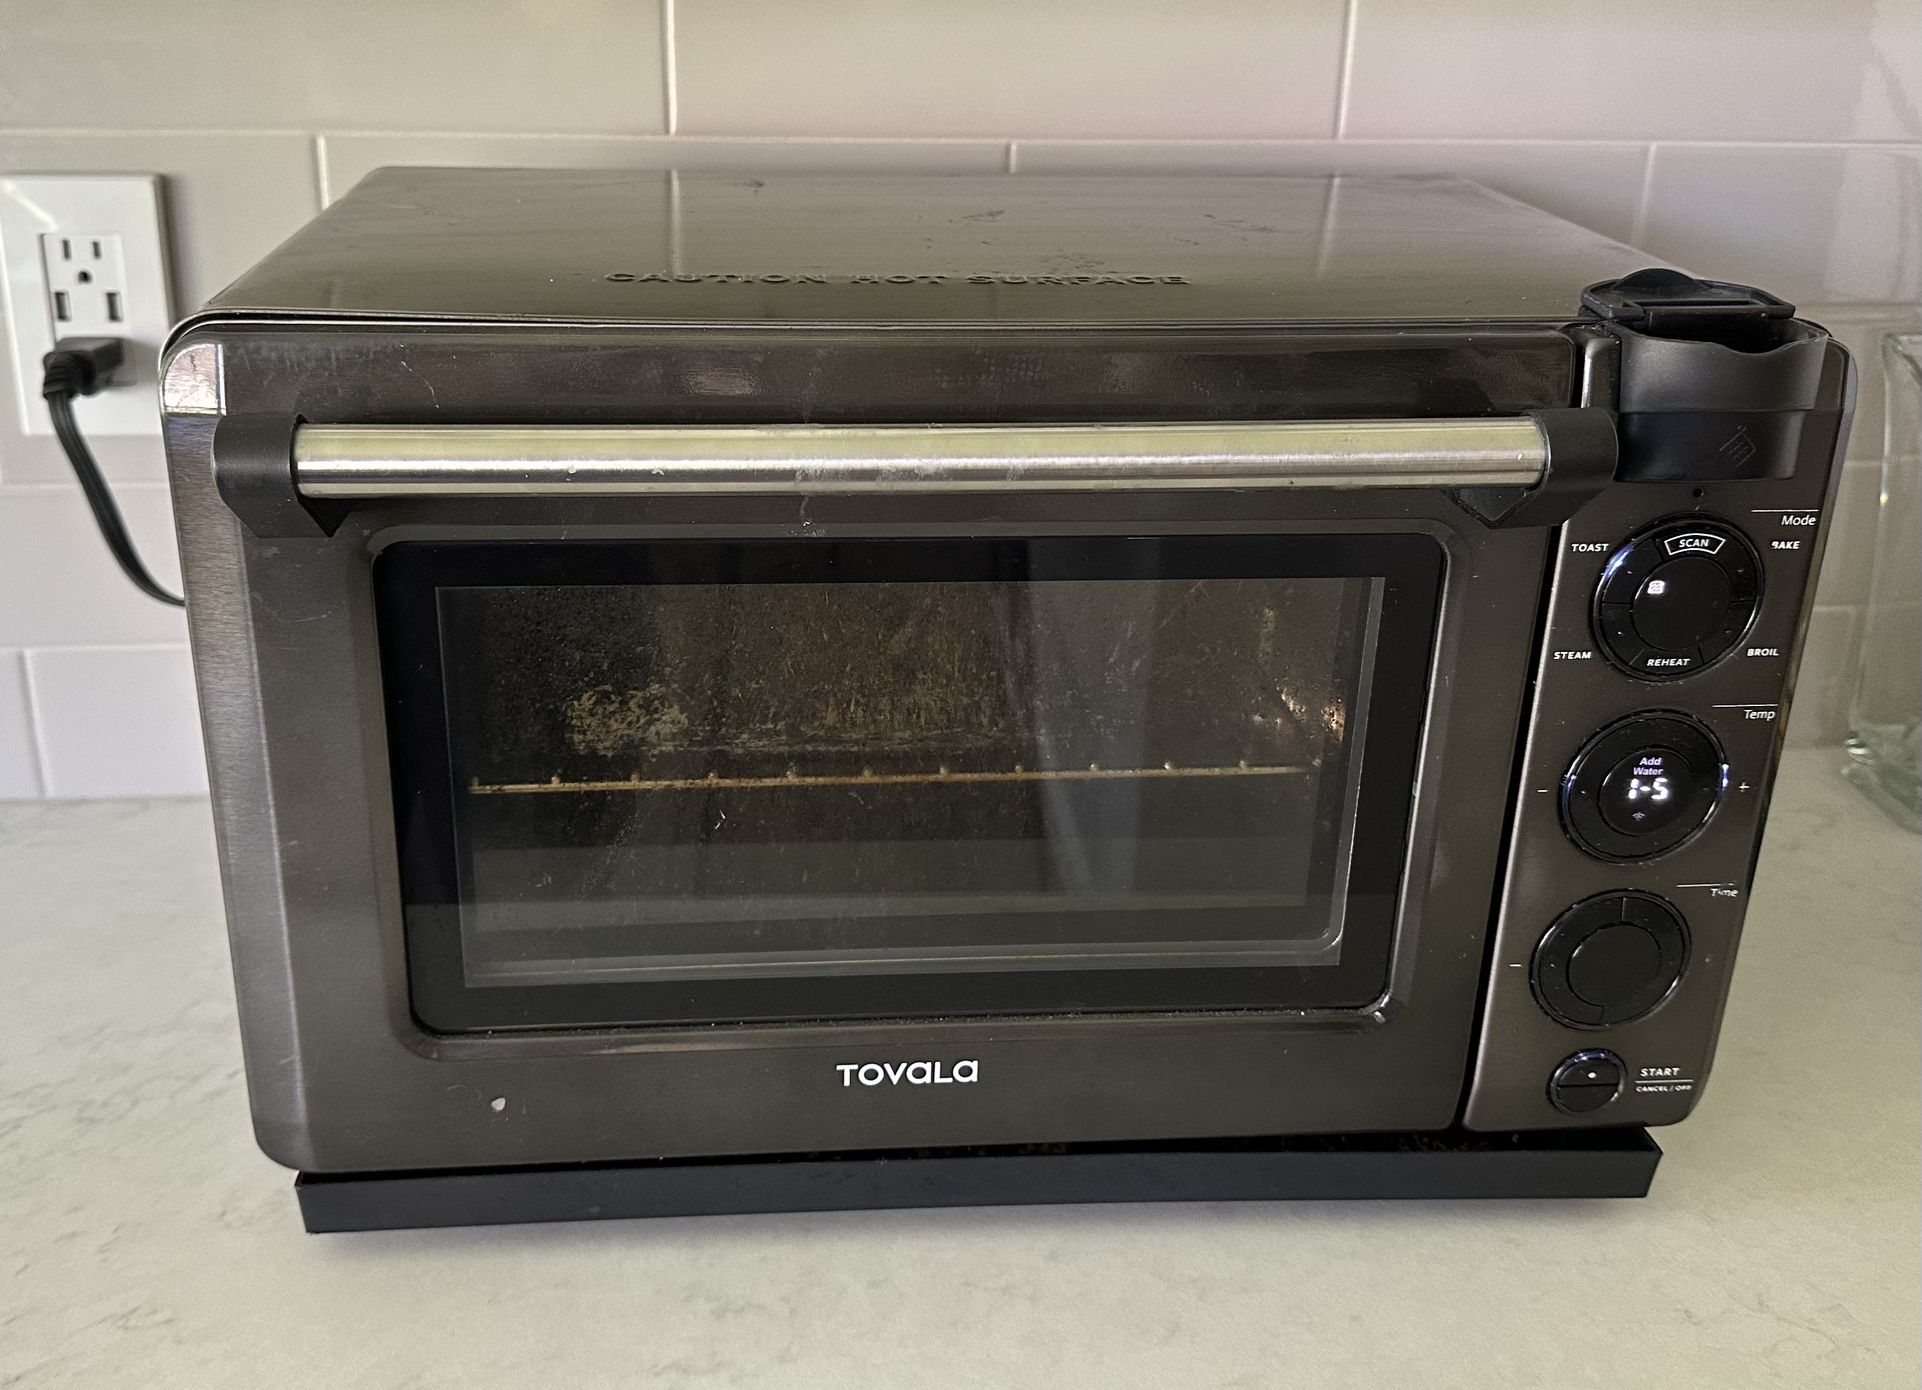 Tovala Gen 2 Smart Steam Oven WiFi Oven With Multi-Mode programmable Cooking Stainless